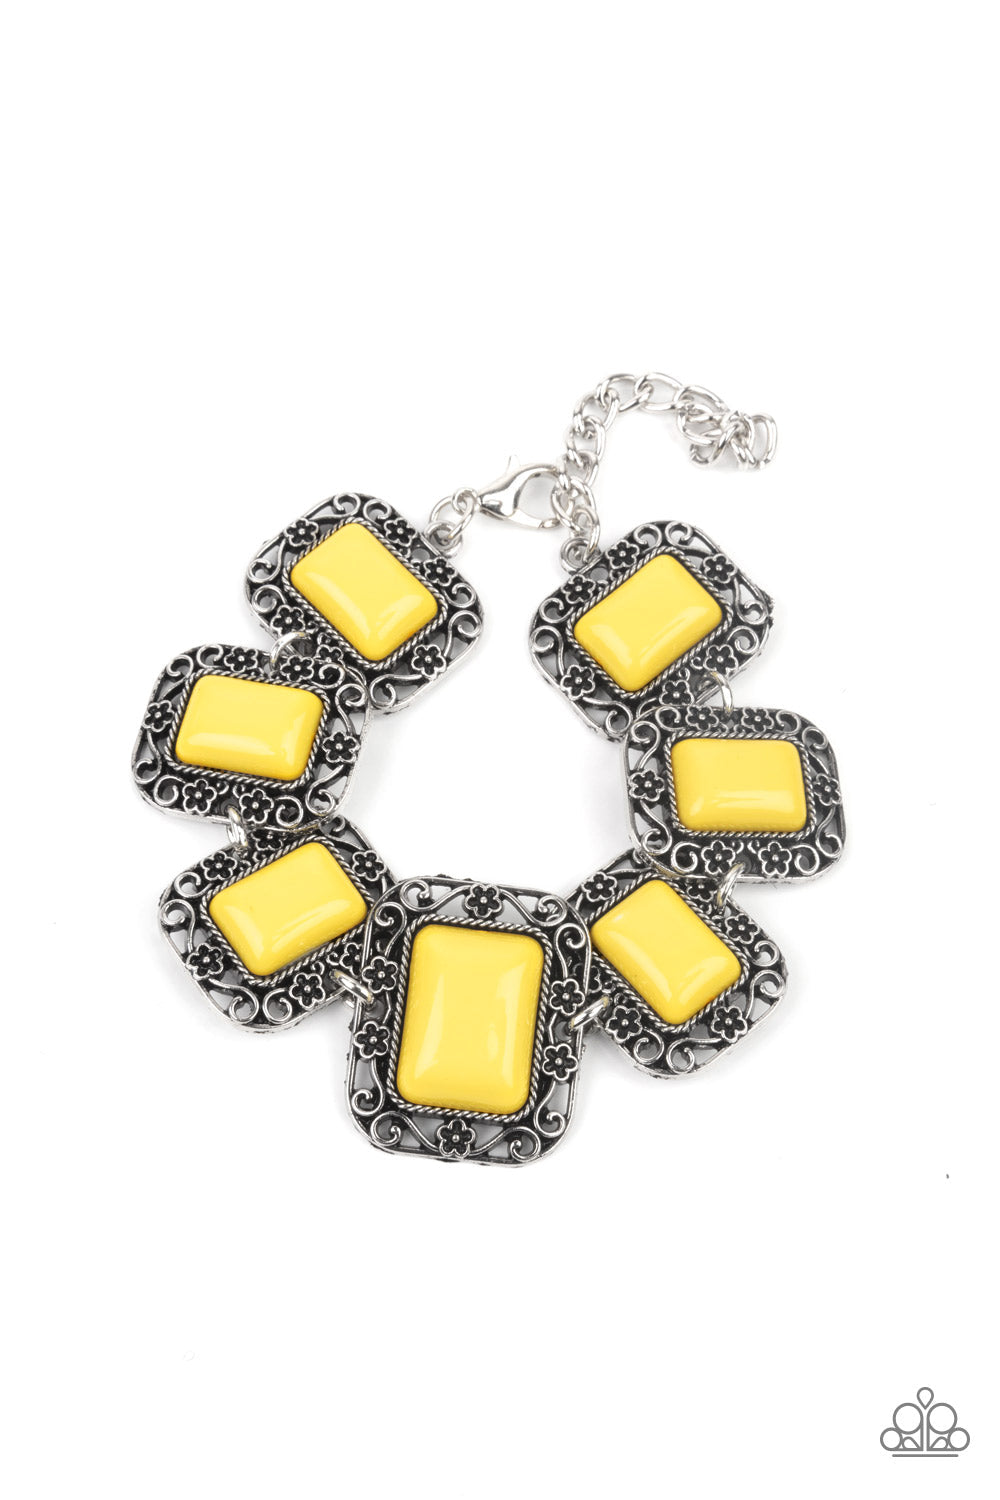 Retro Rodeo - Yellow and Silver Bracelet - Paparazzi Accessories Adjustable Clasp Bracelet Bejeweled Accessories By Kristie Featuring Paparazzi Jewelry  - Trendy fashion jewelry for everyone -